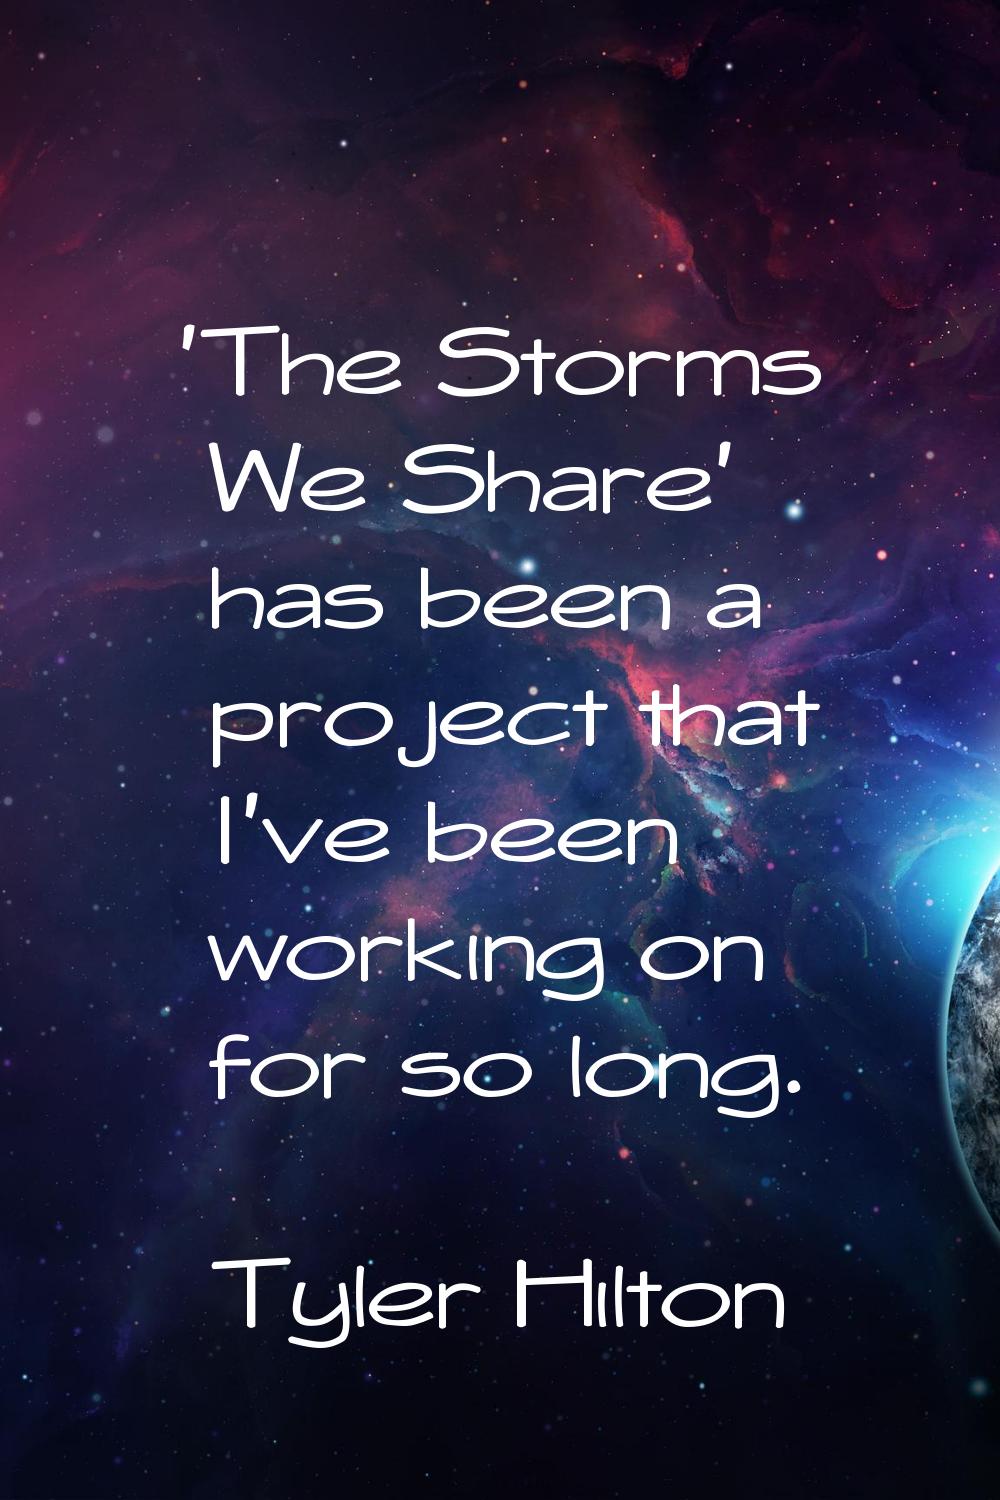 'The Storms We Share' has been a project that I've been working on for so long.